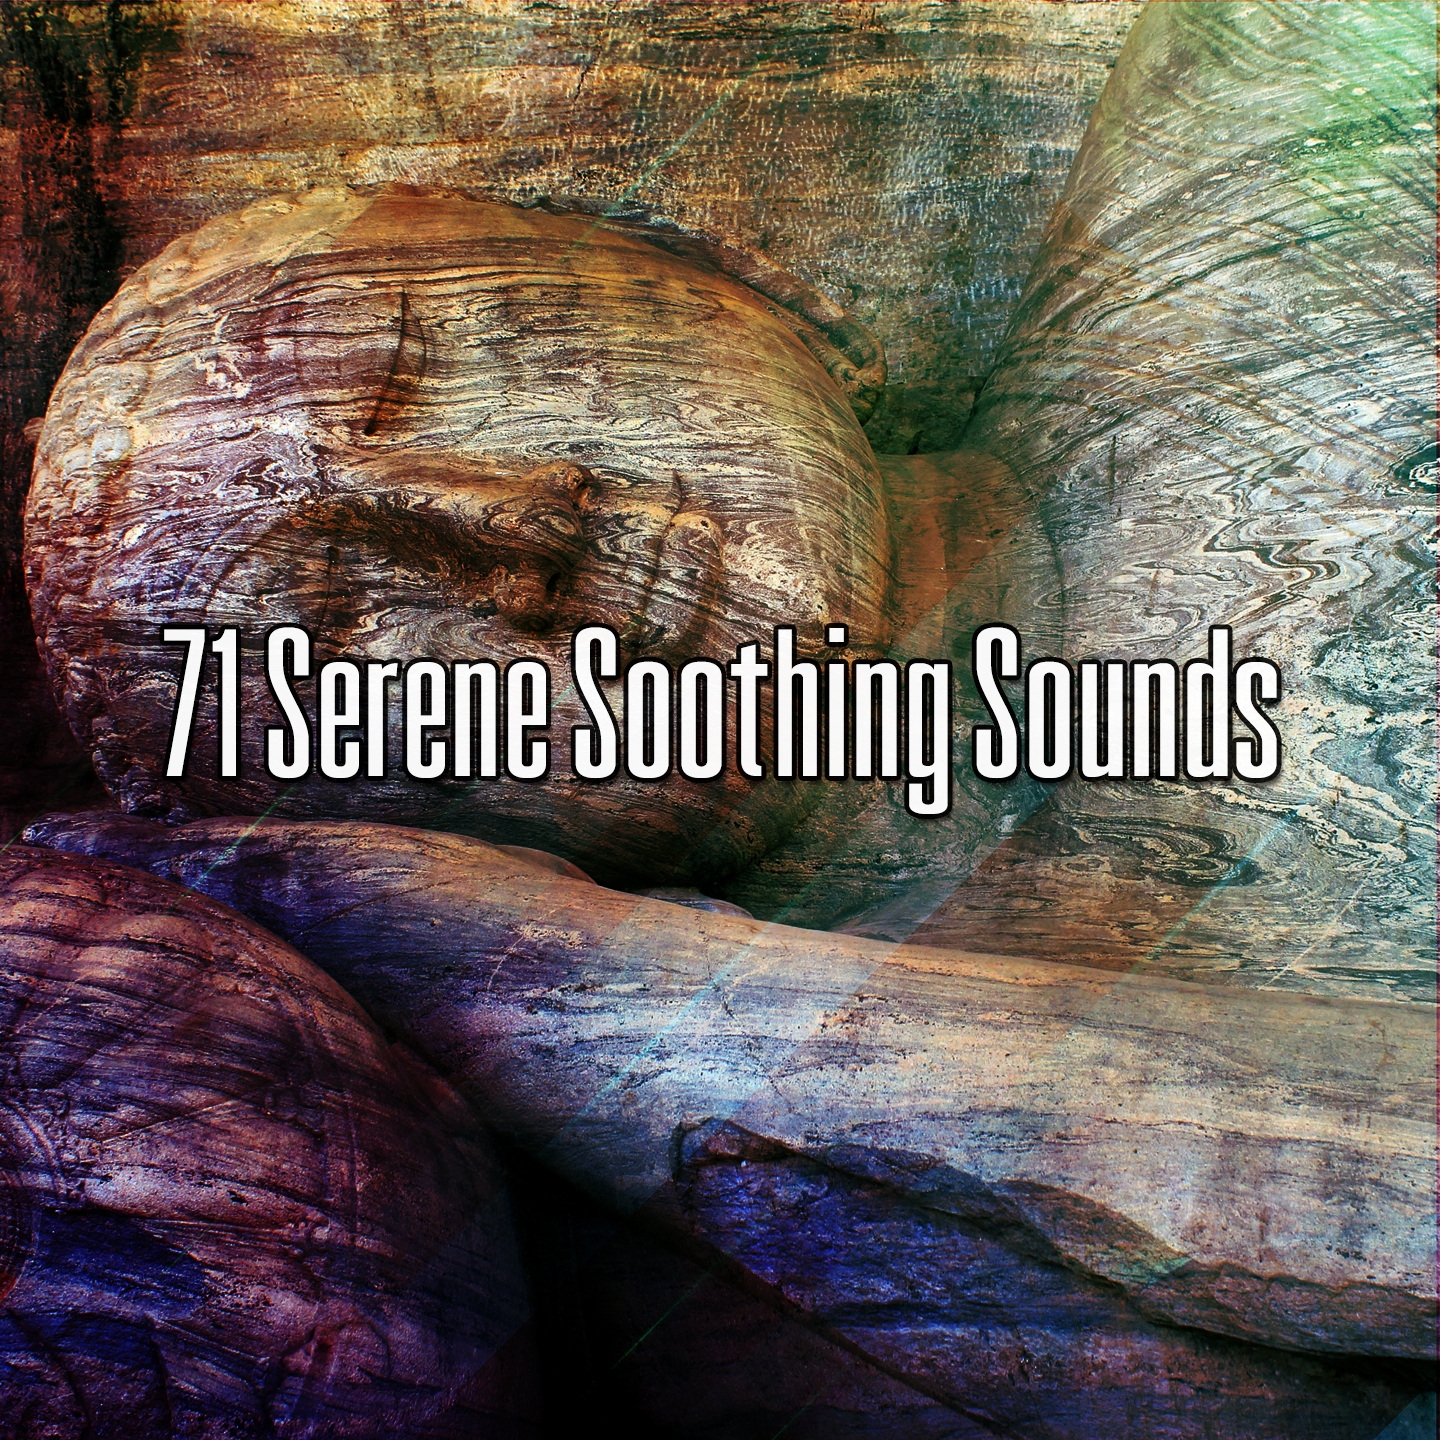 71 Serene Soothing Sounds